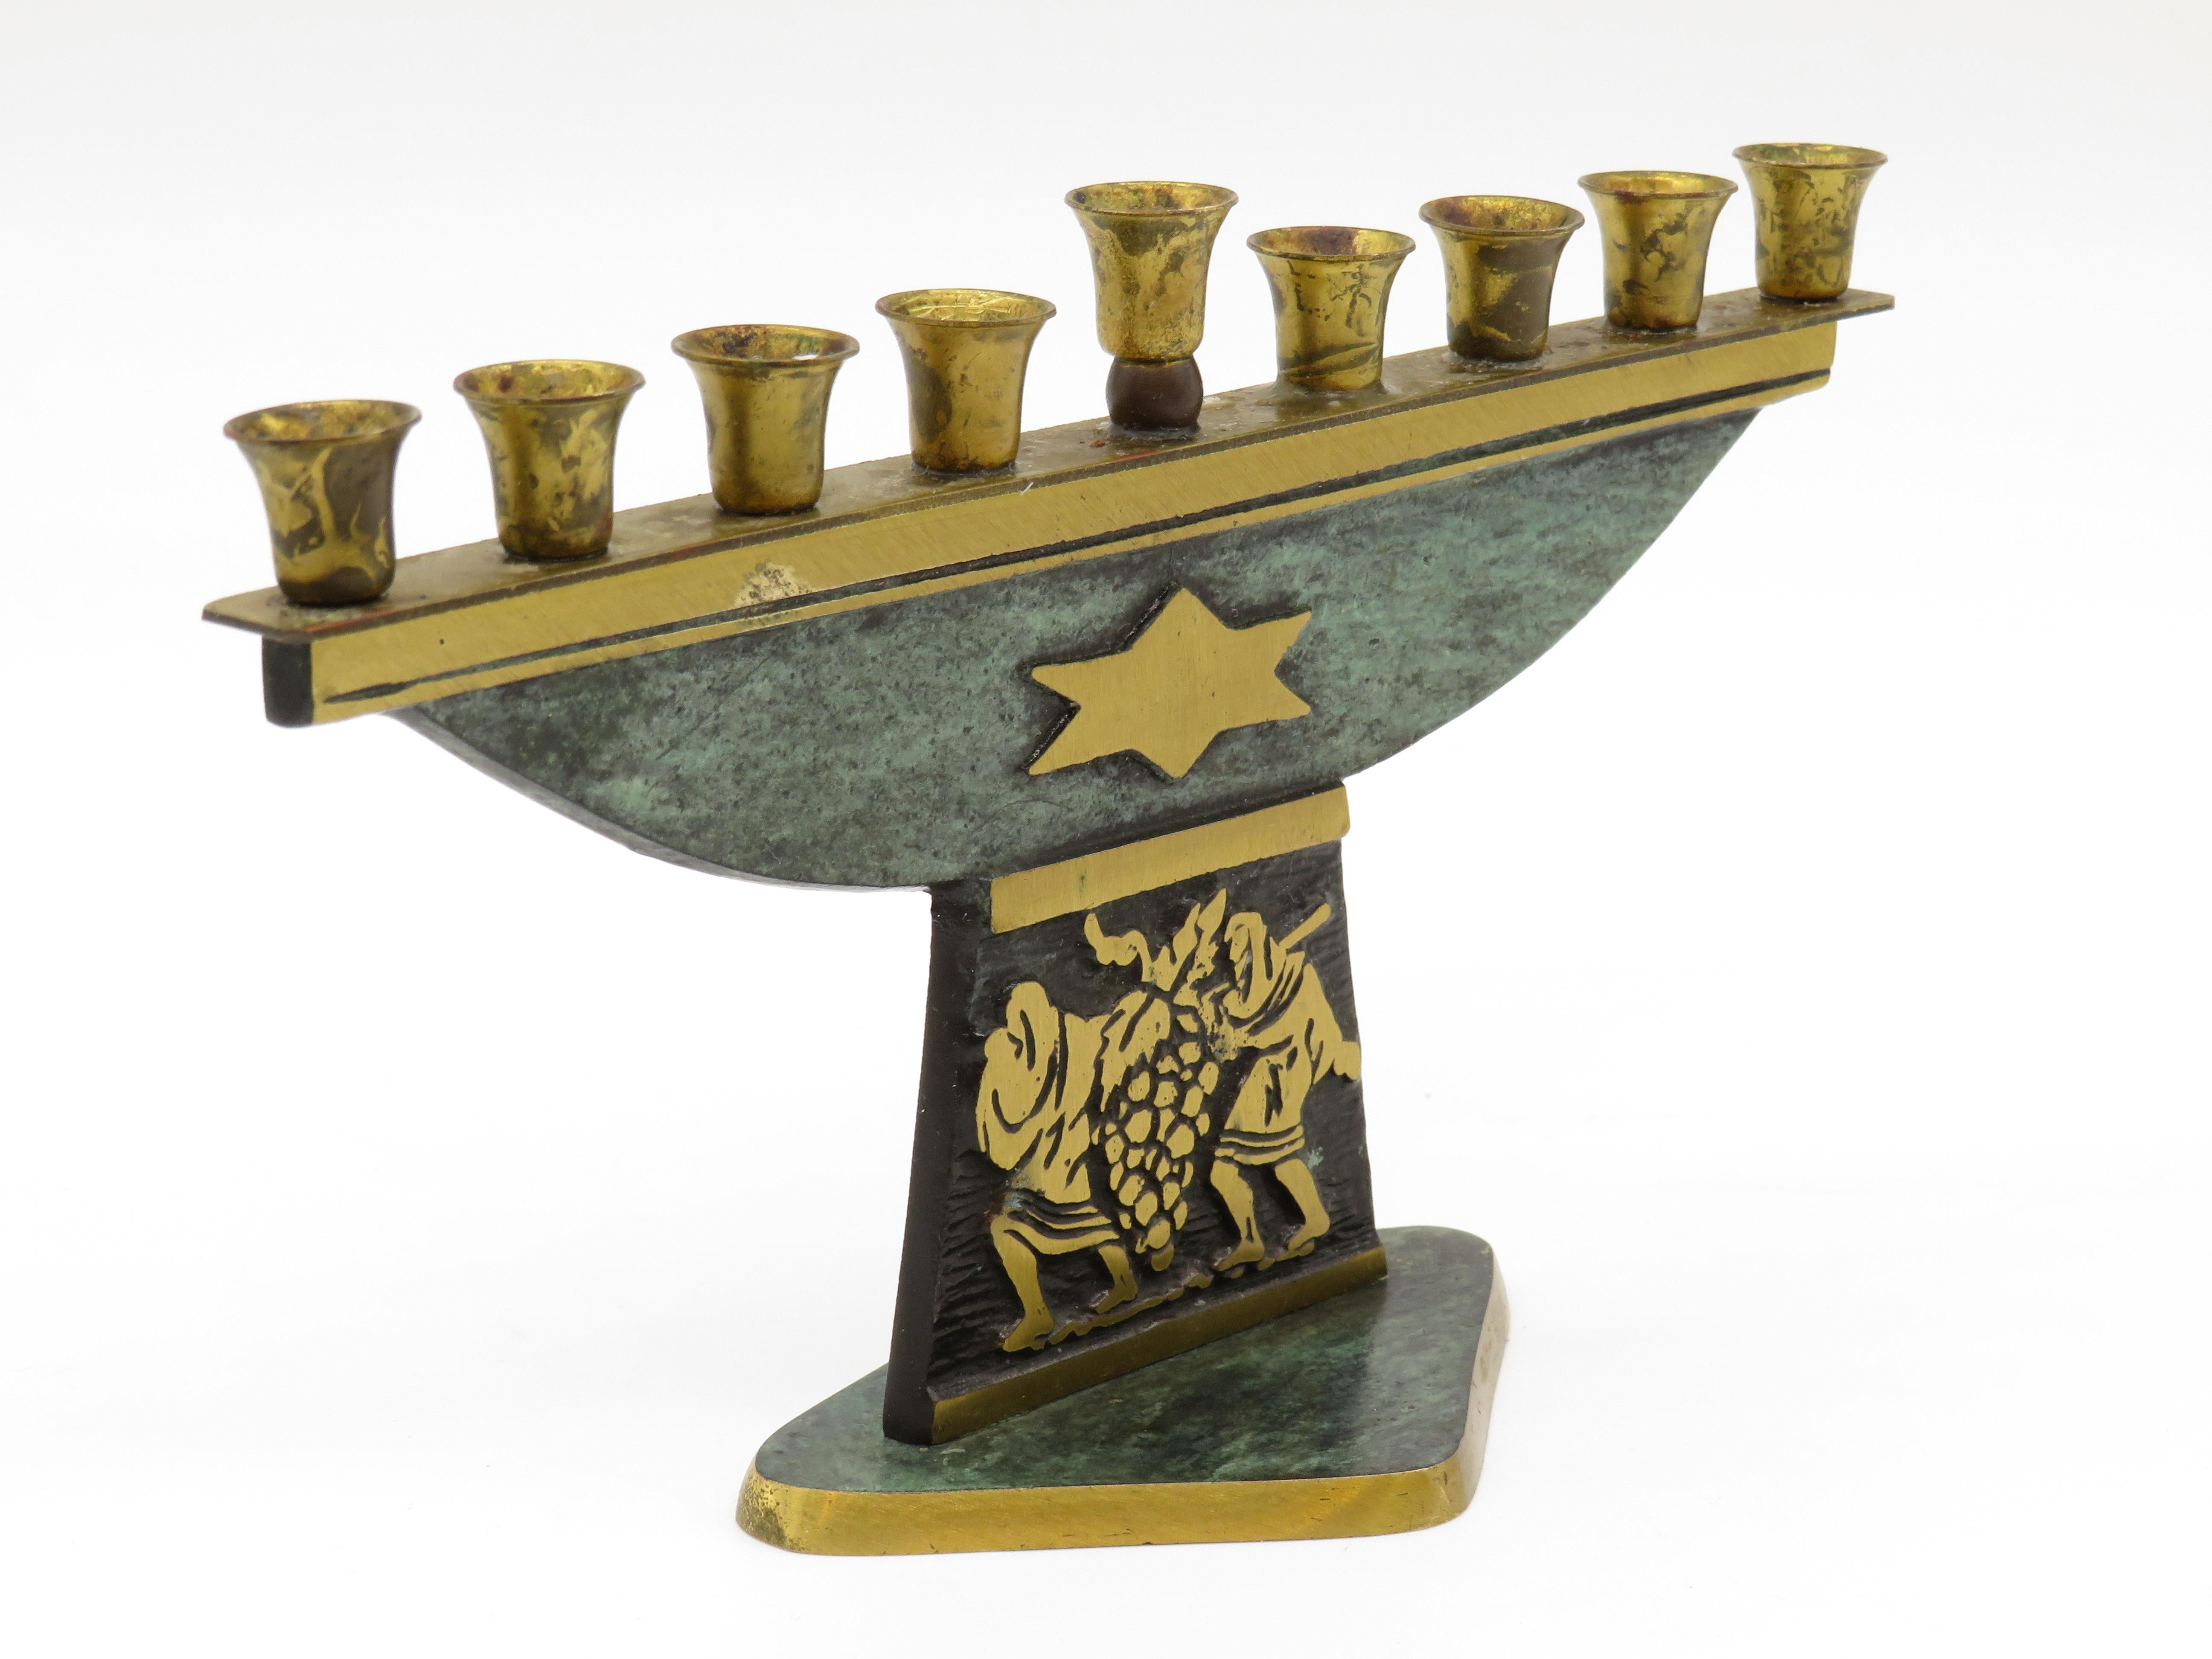 Hanukkah lamp menorah made in Israel, circa 1950s. Signed on the bottom Dayagi. Green patina overlay in the front with a bold Star of David. A detailed scene of the spices on the way to Israel is depicted. Gilded accents on detailed scene and bottom